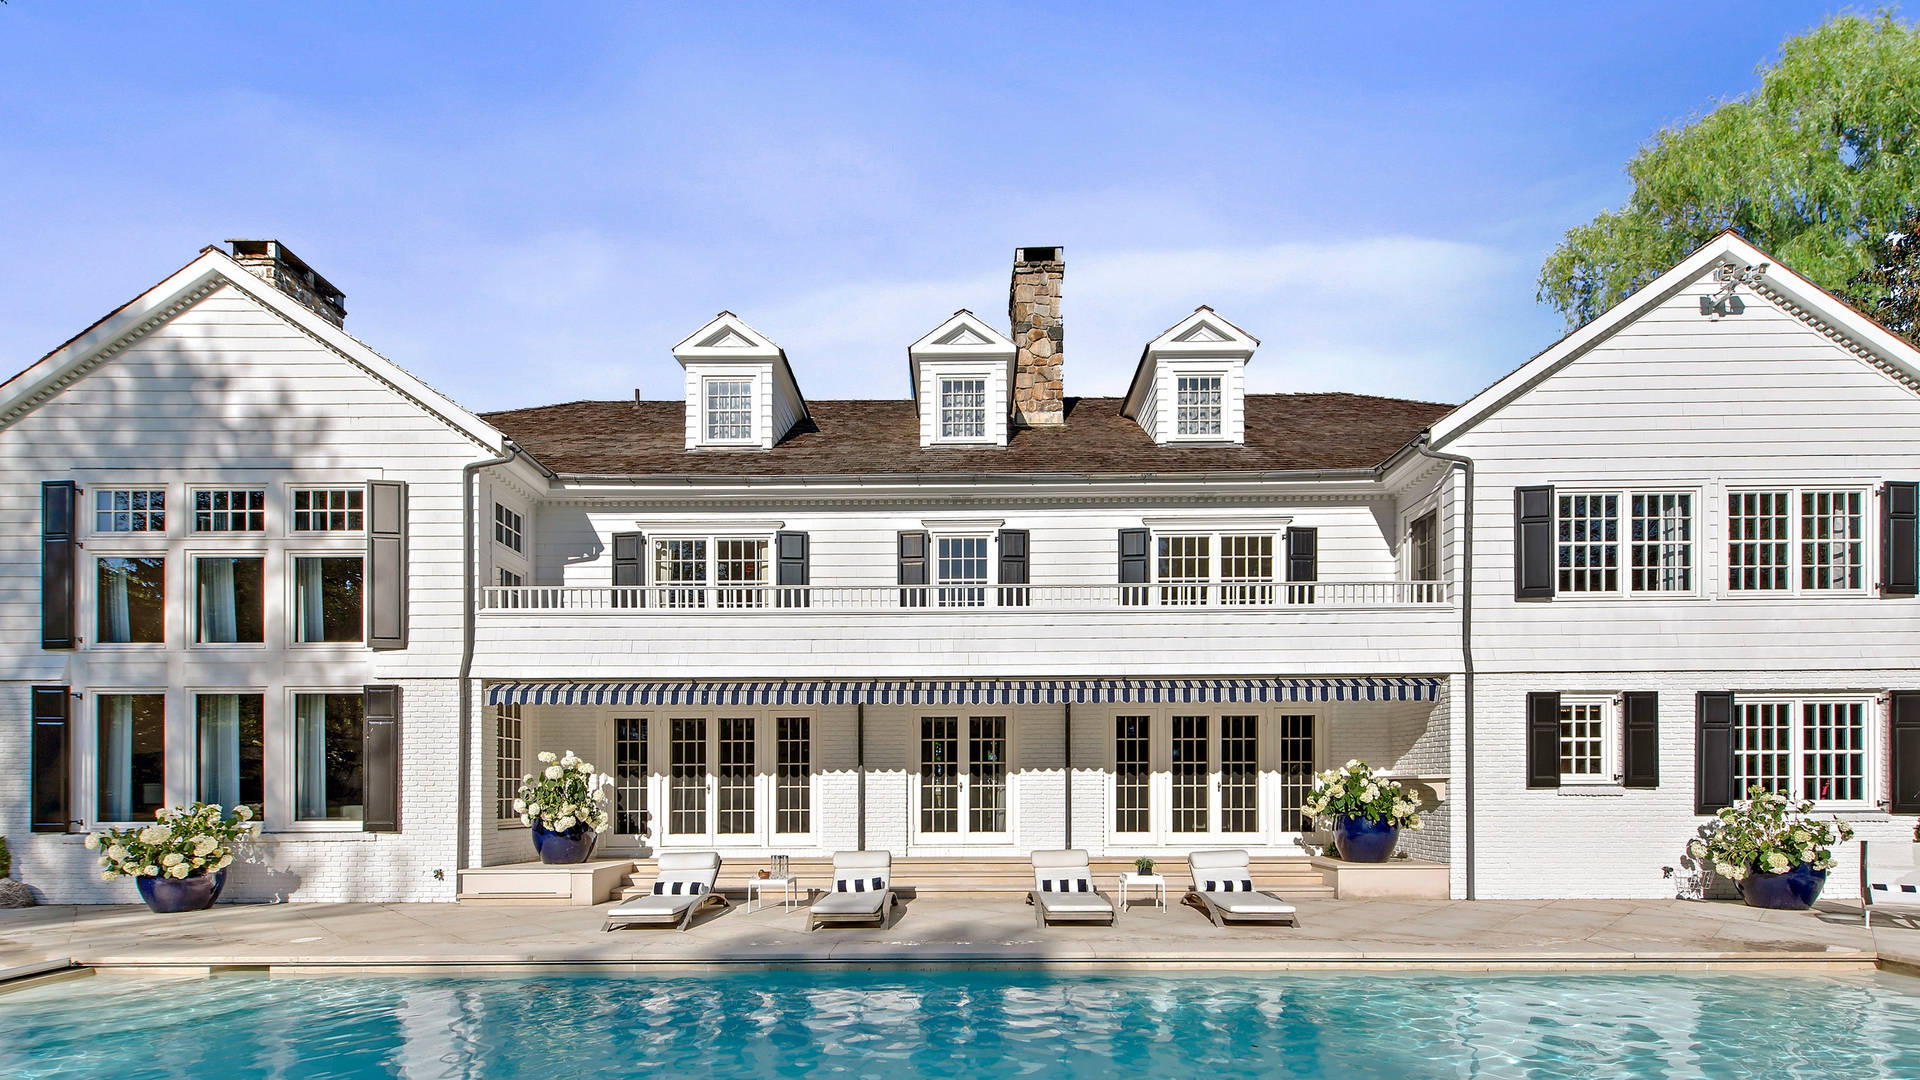 Mansion Pool In Greenwich Ct Wallpaper